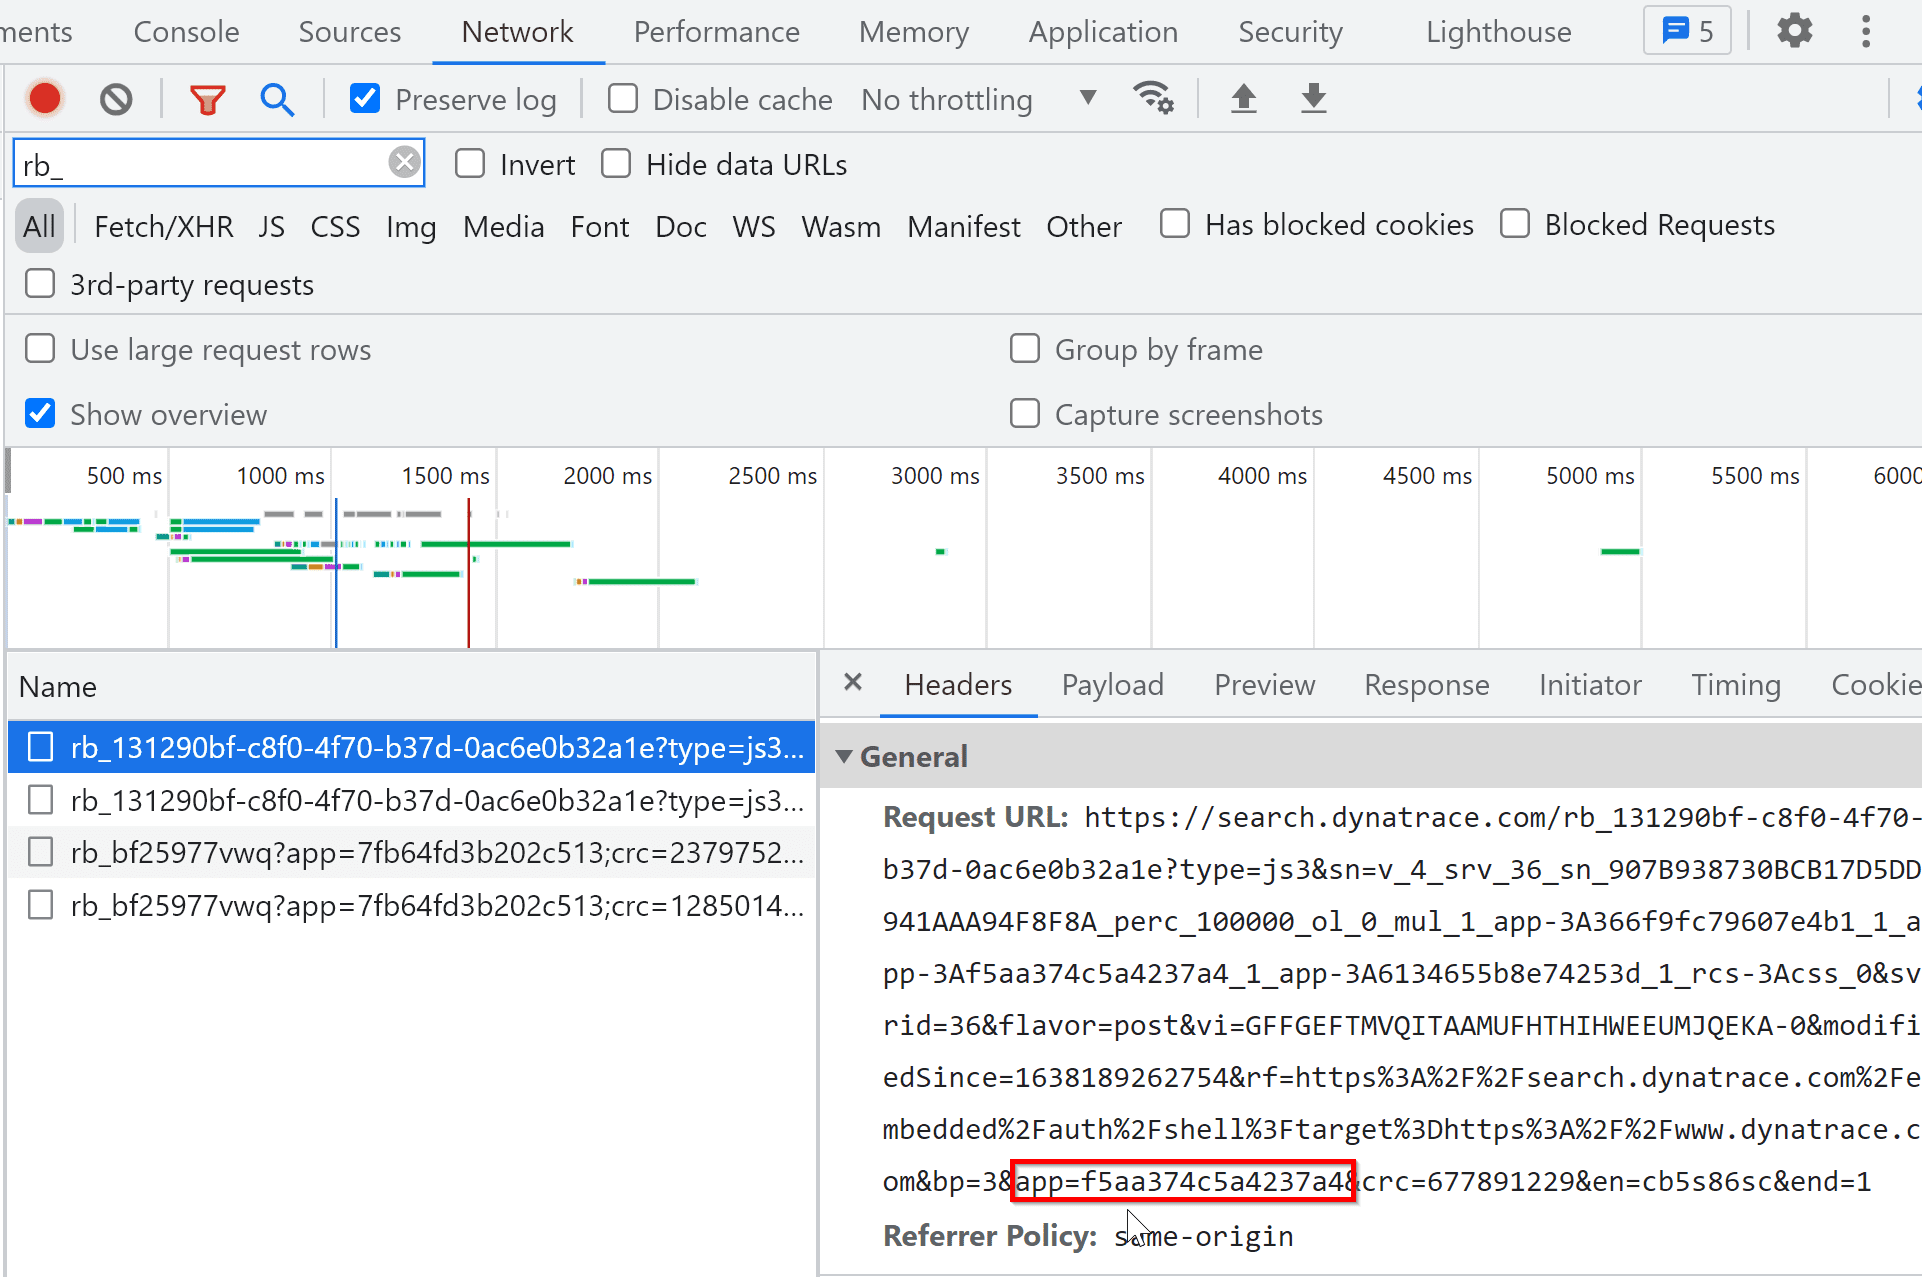 App parameter added to the query string